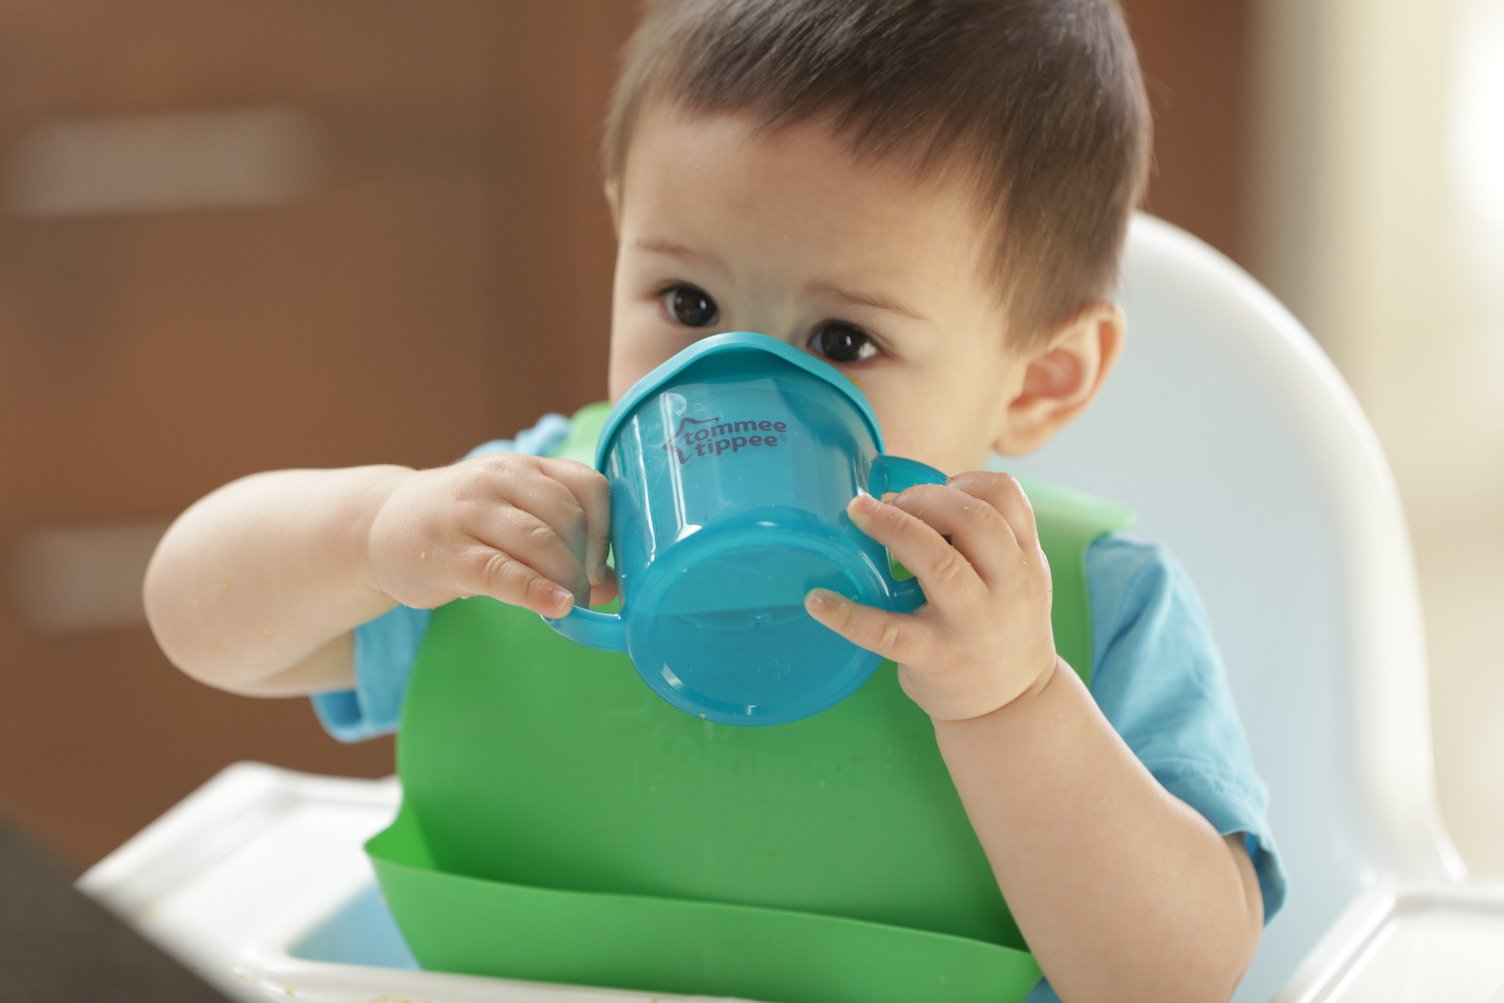 Tommee Tippee Easi-Roll Baby Bib, Crumb & Drip Catcher, Blue & Green - 7+ Months, 2 Count